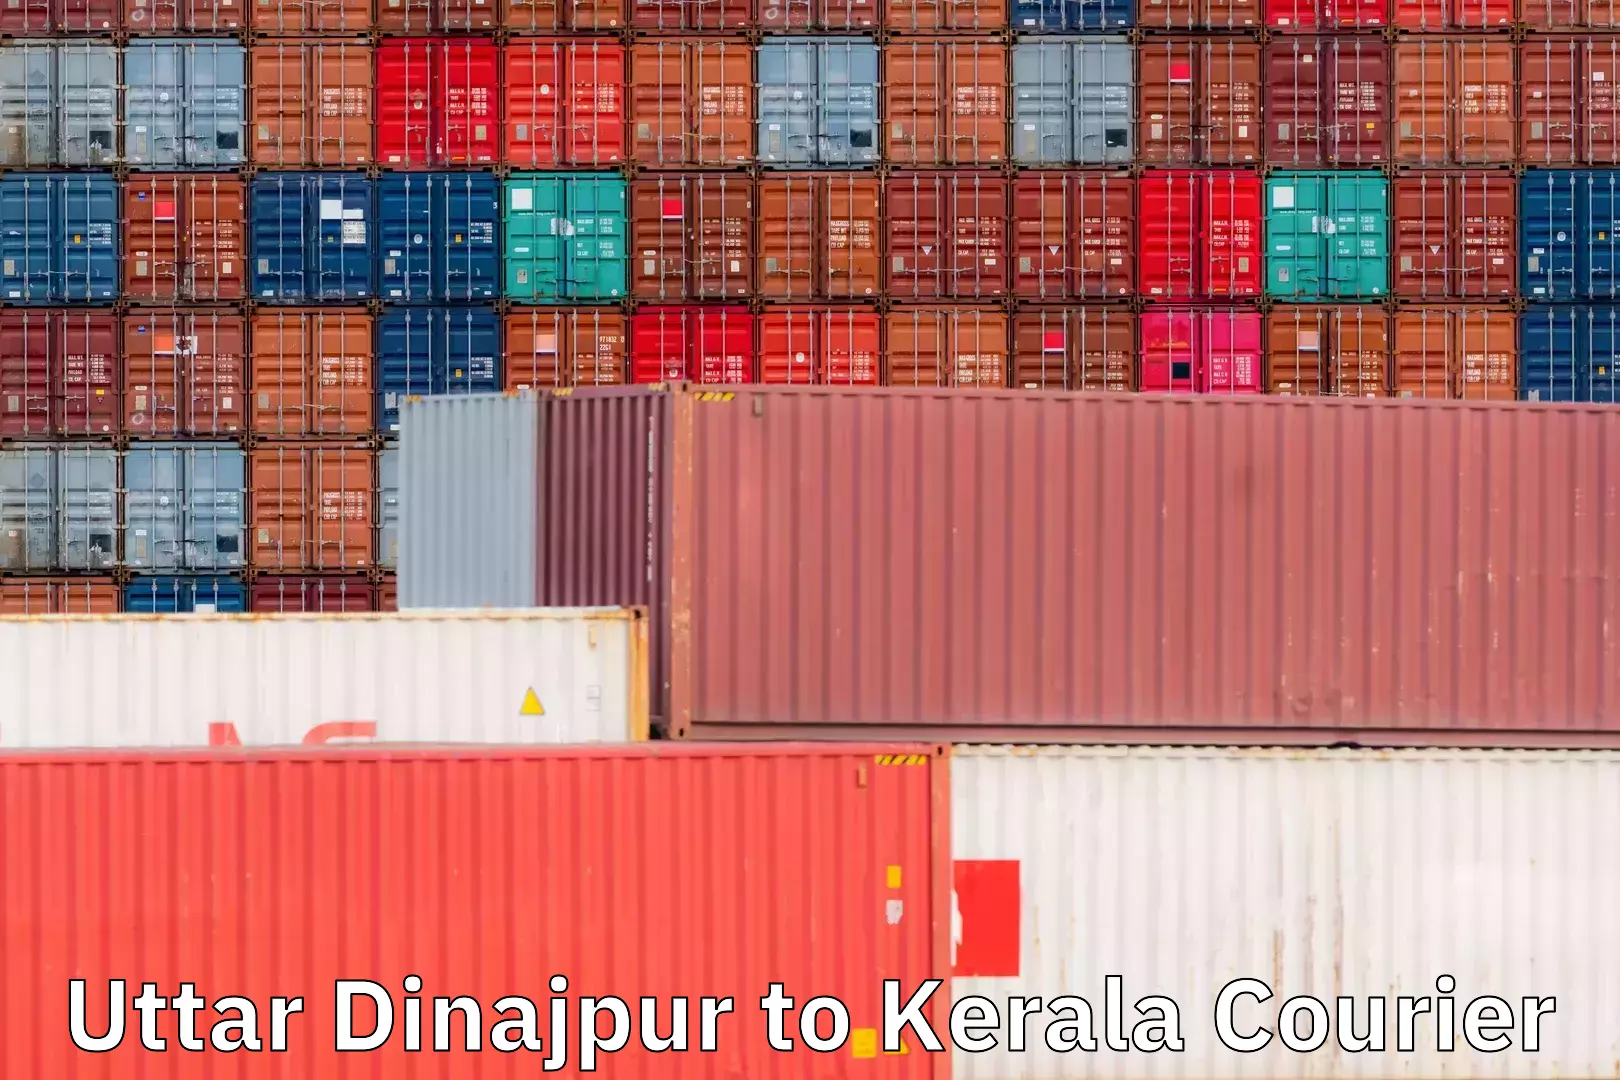 Optimized delivery routes Uttar Dinajpur to Kerala